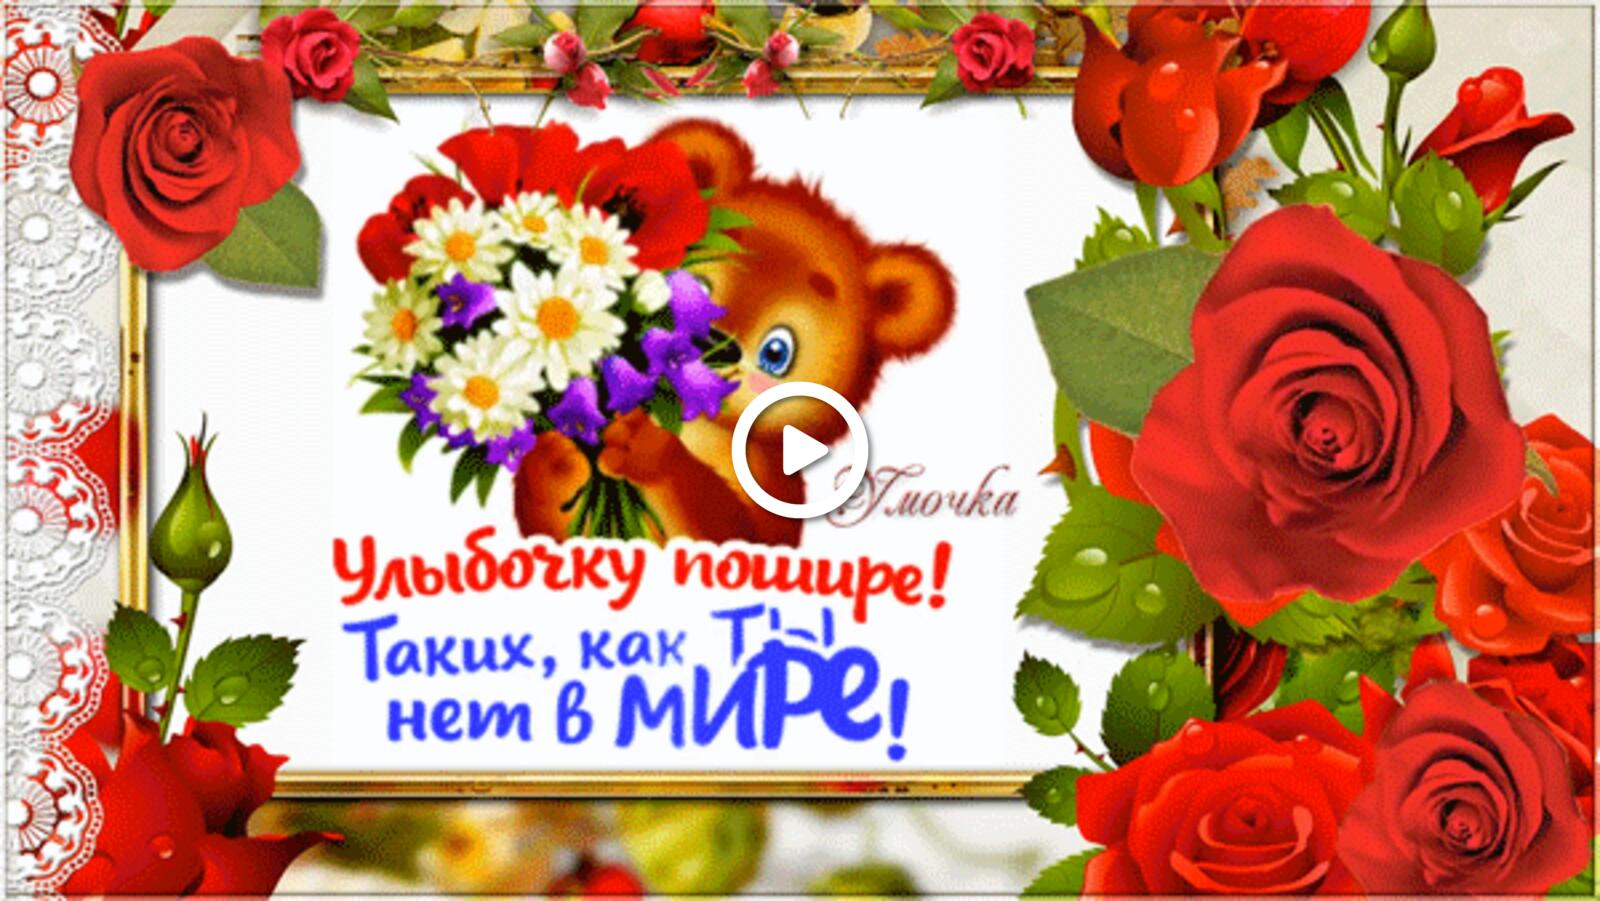 A postcard on the subject of grin flowers teddy bear for free